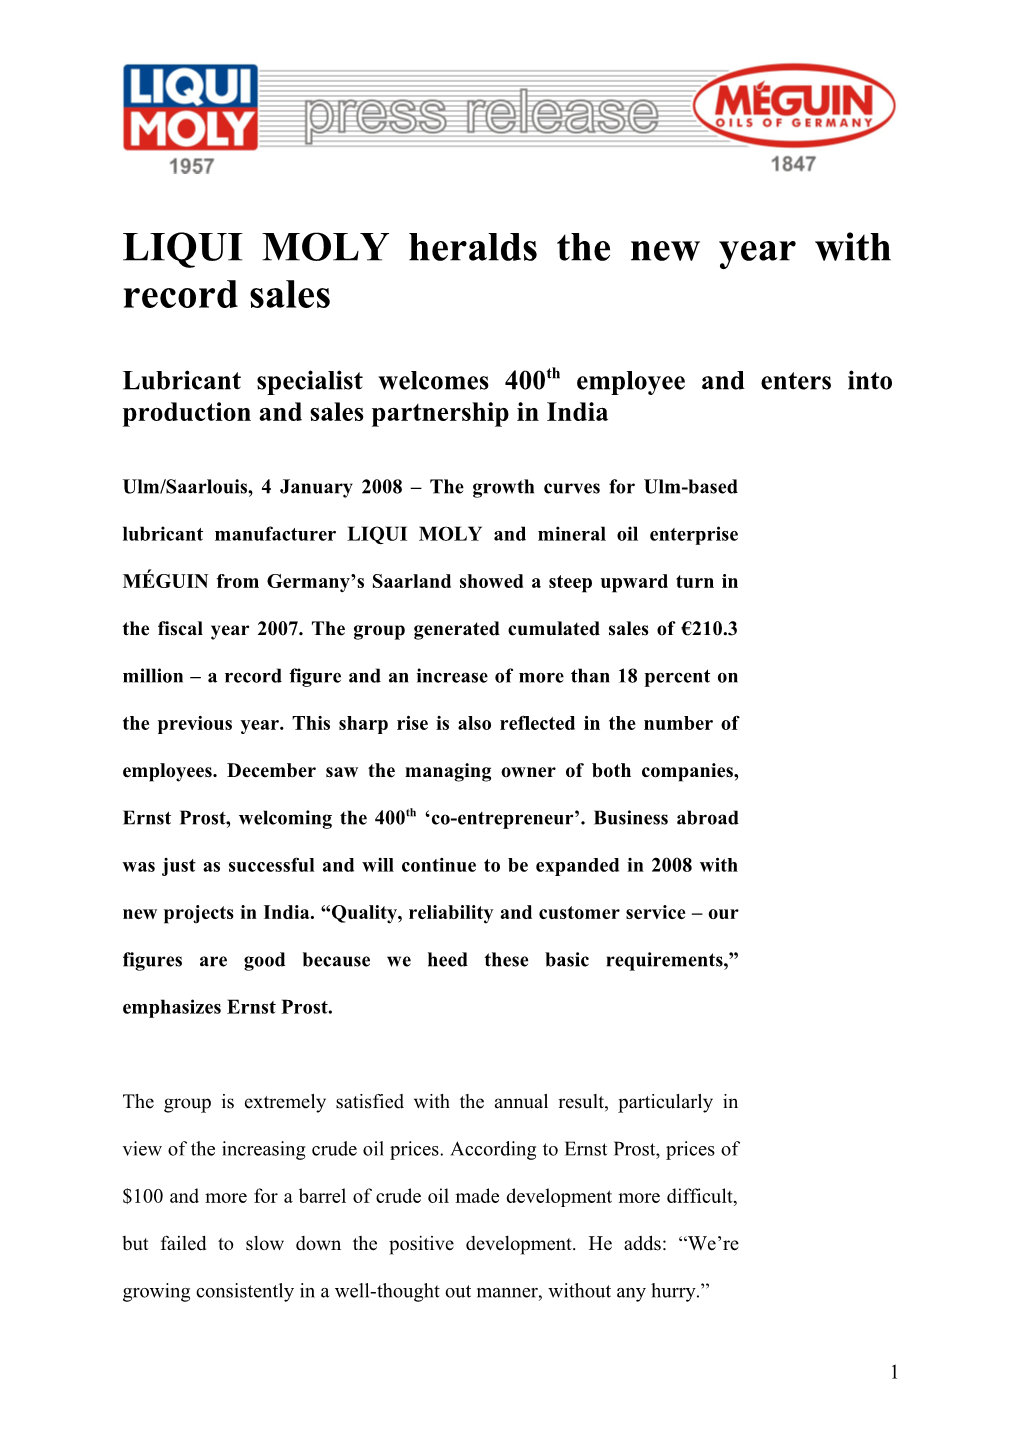 LIQUI MOLY Heralds the New Year with Record Sales